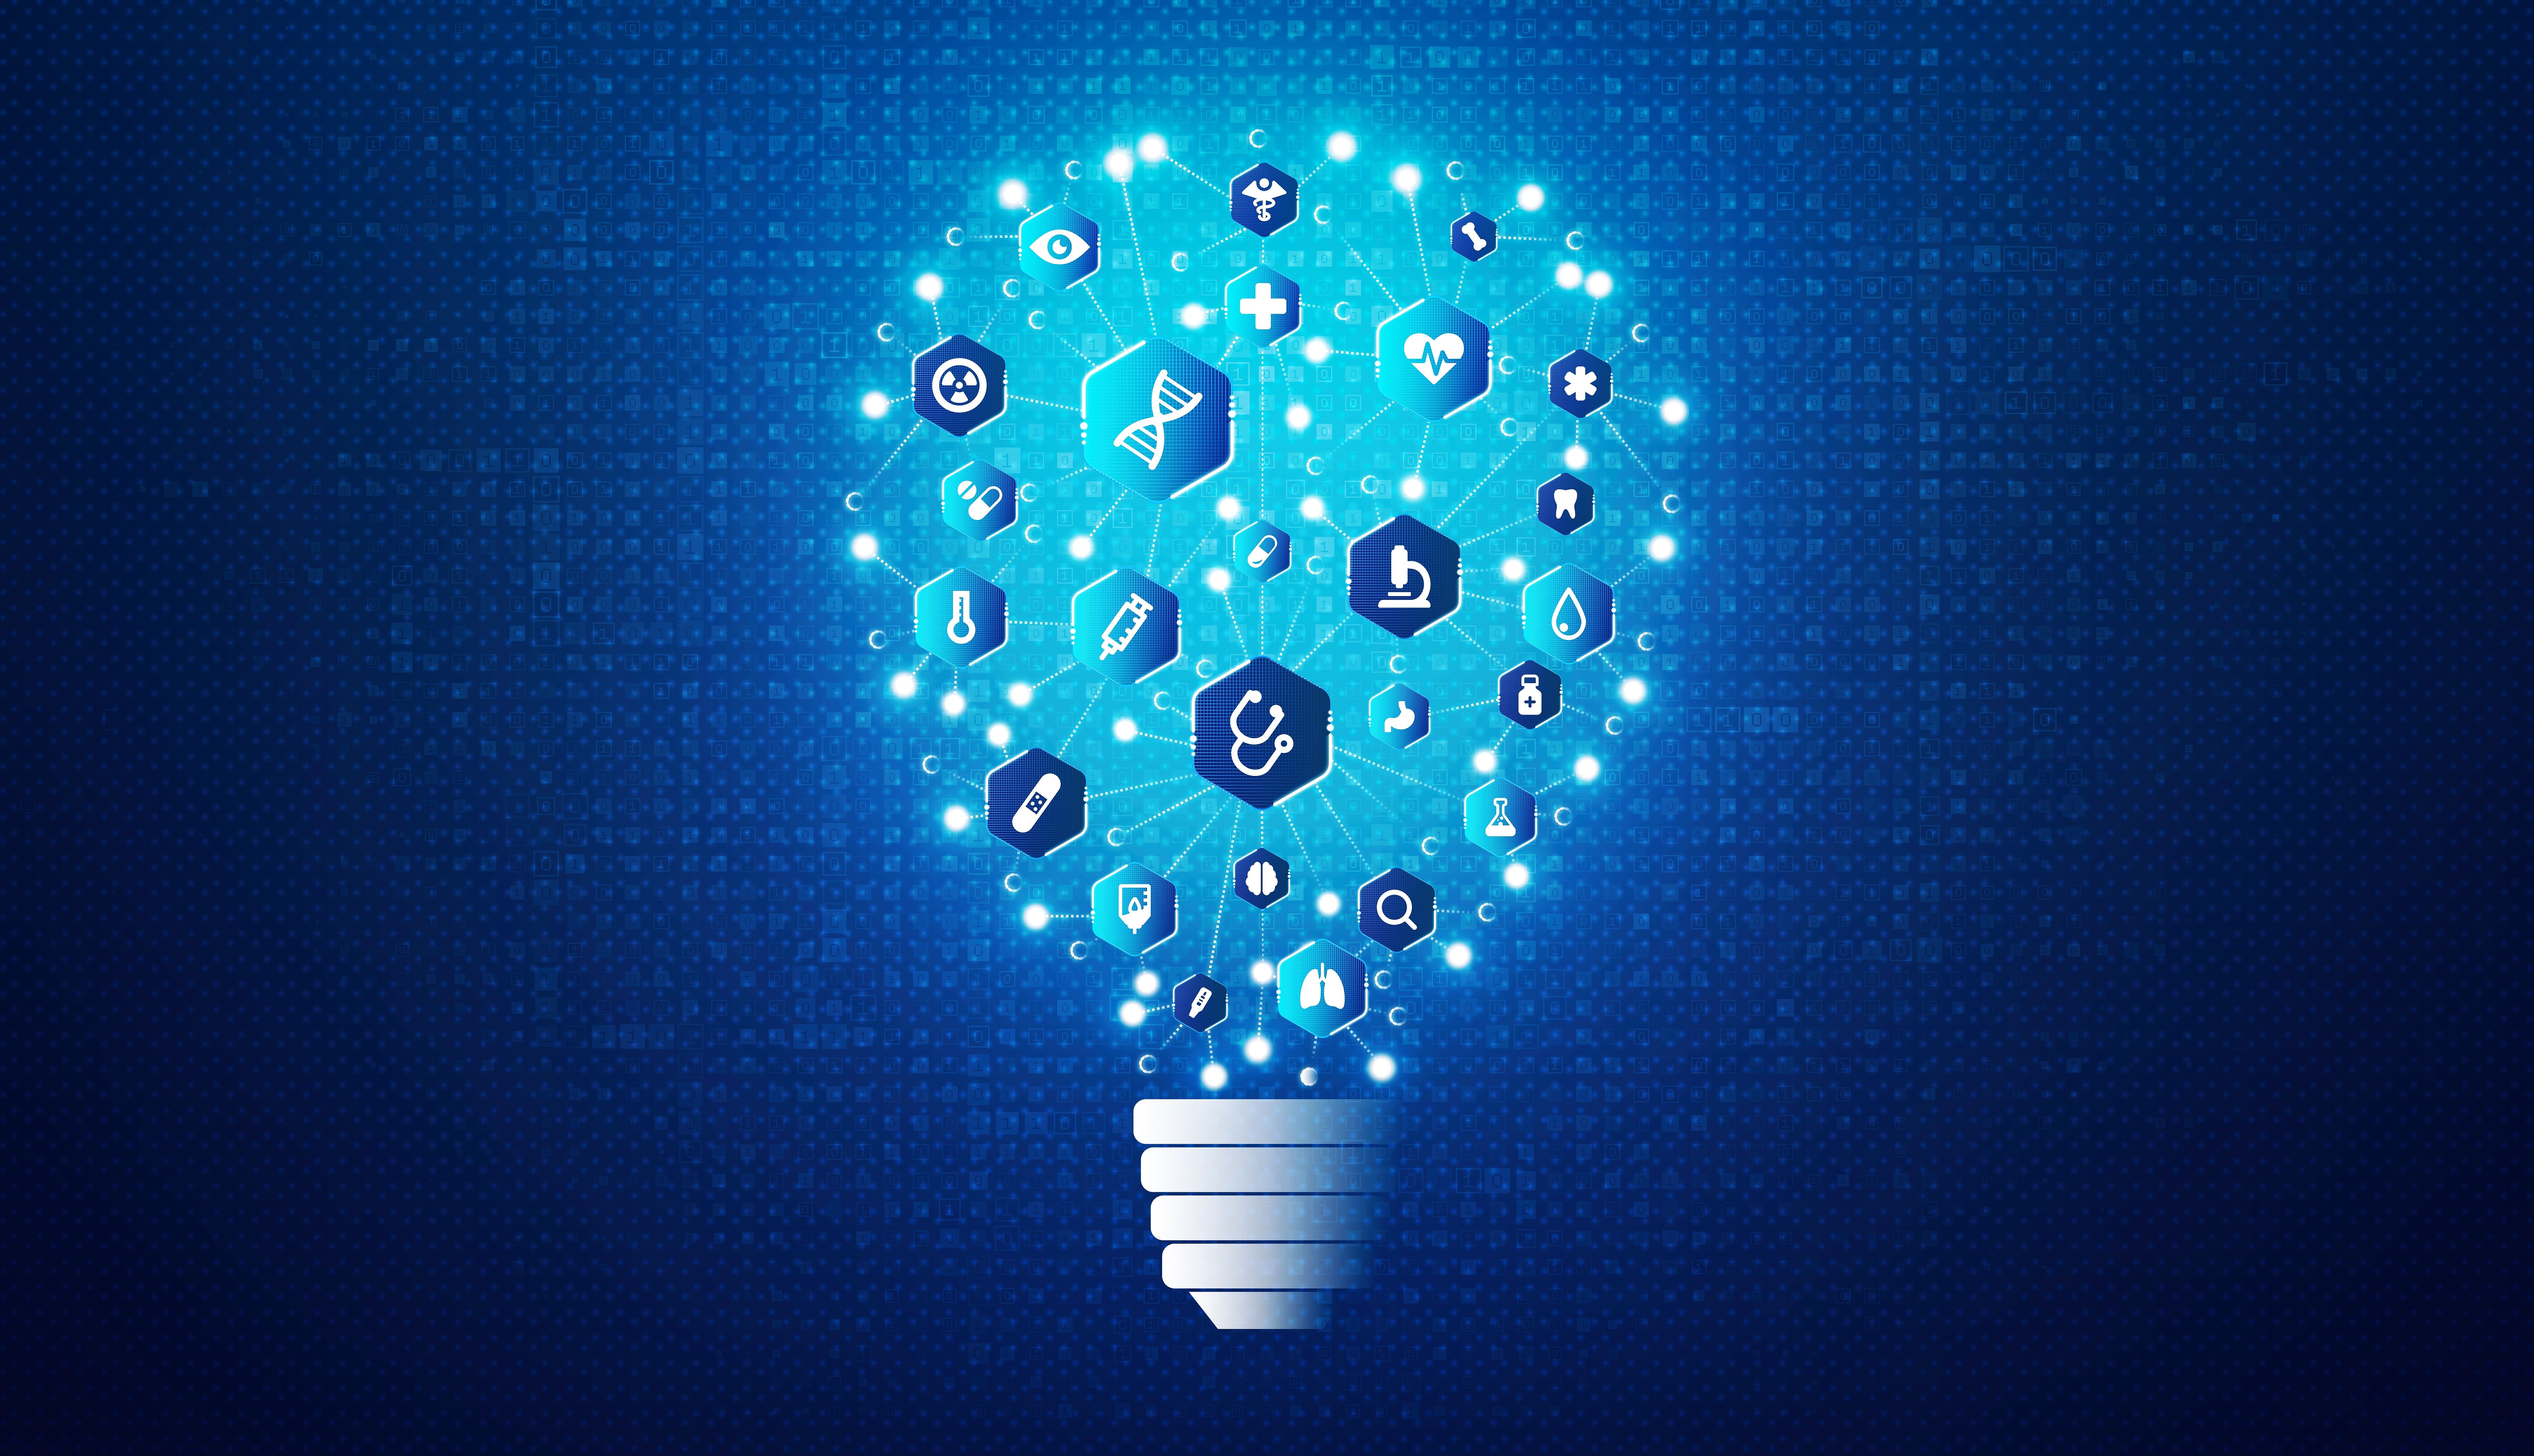 Clinical research graphic shaped like lightbulb | image credit: ArtemisDiana – stock.adobe.com